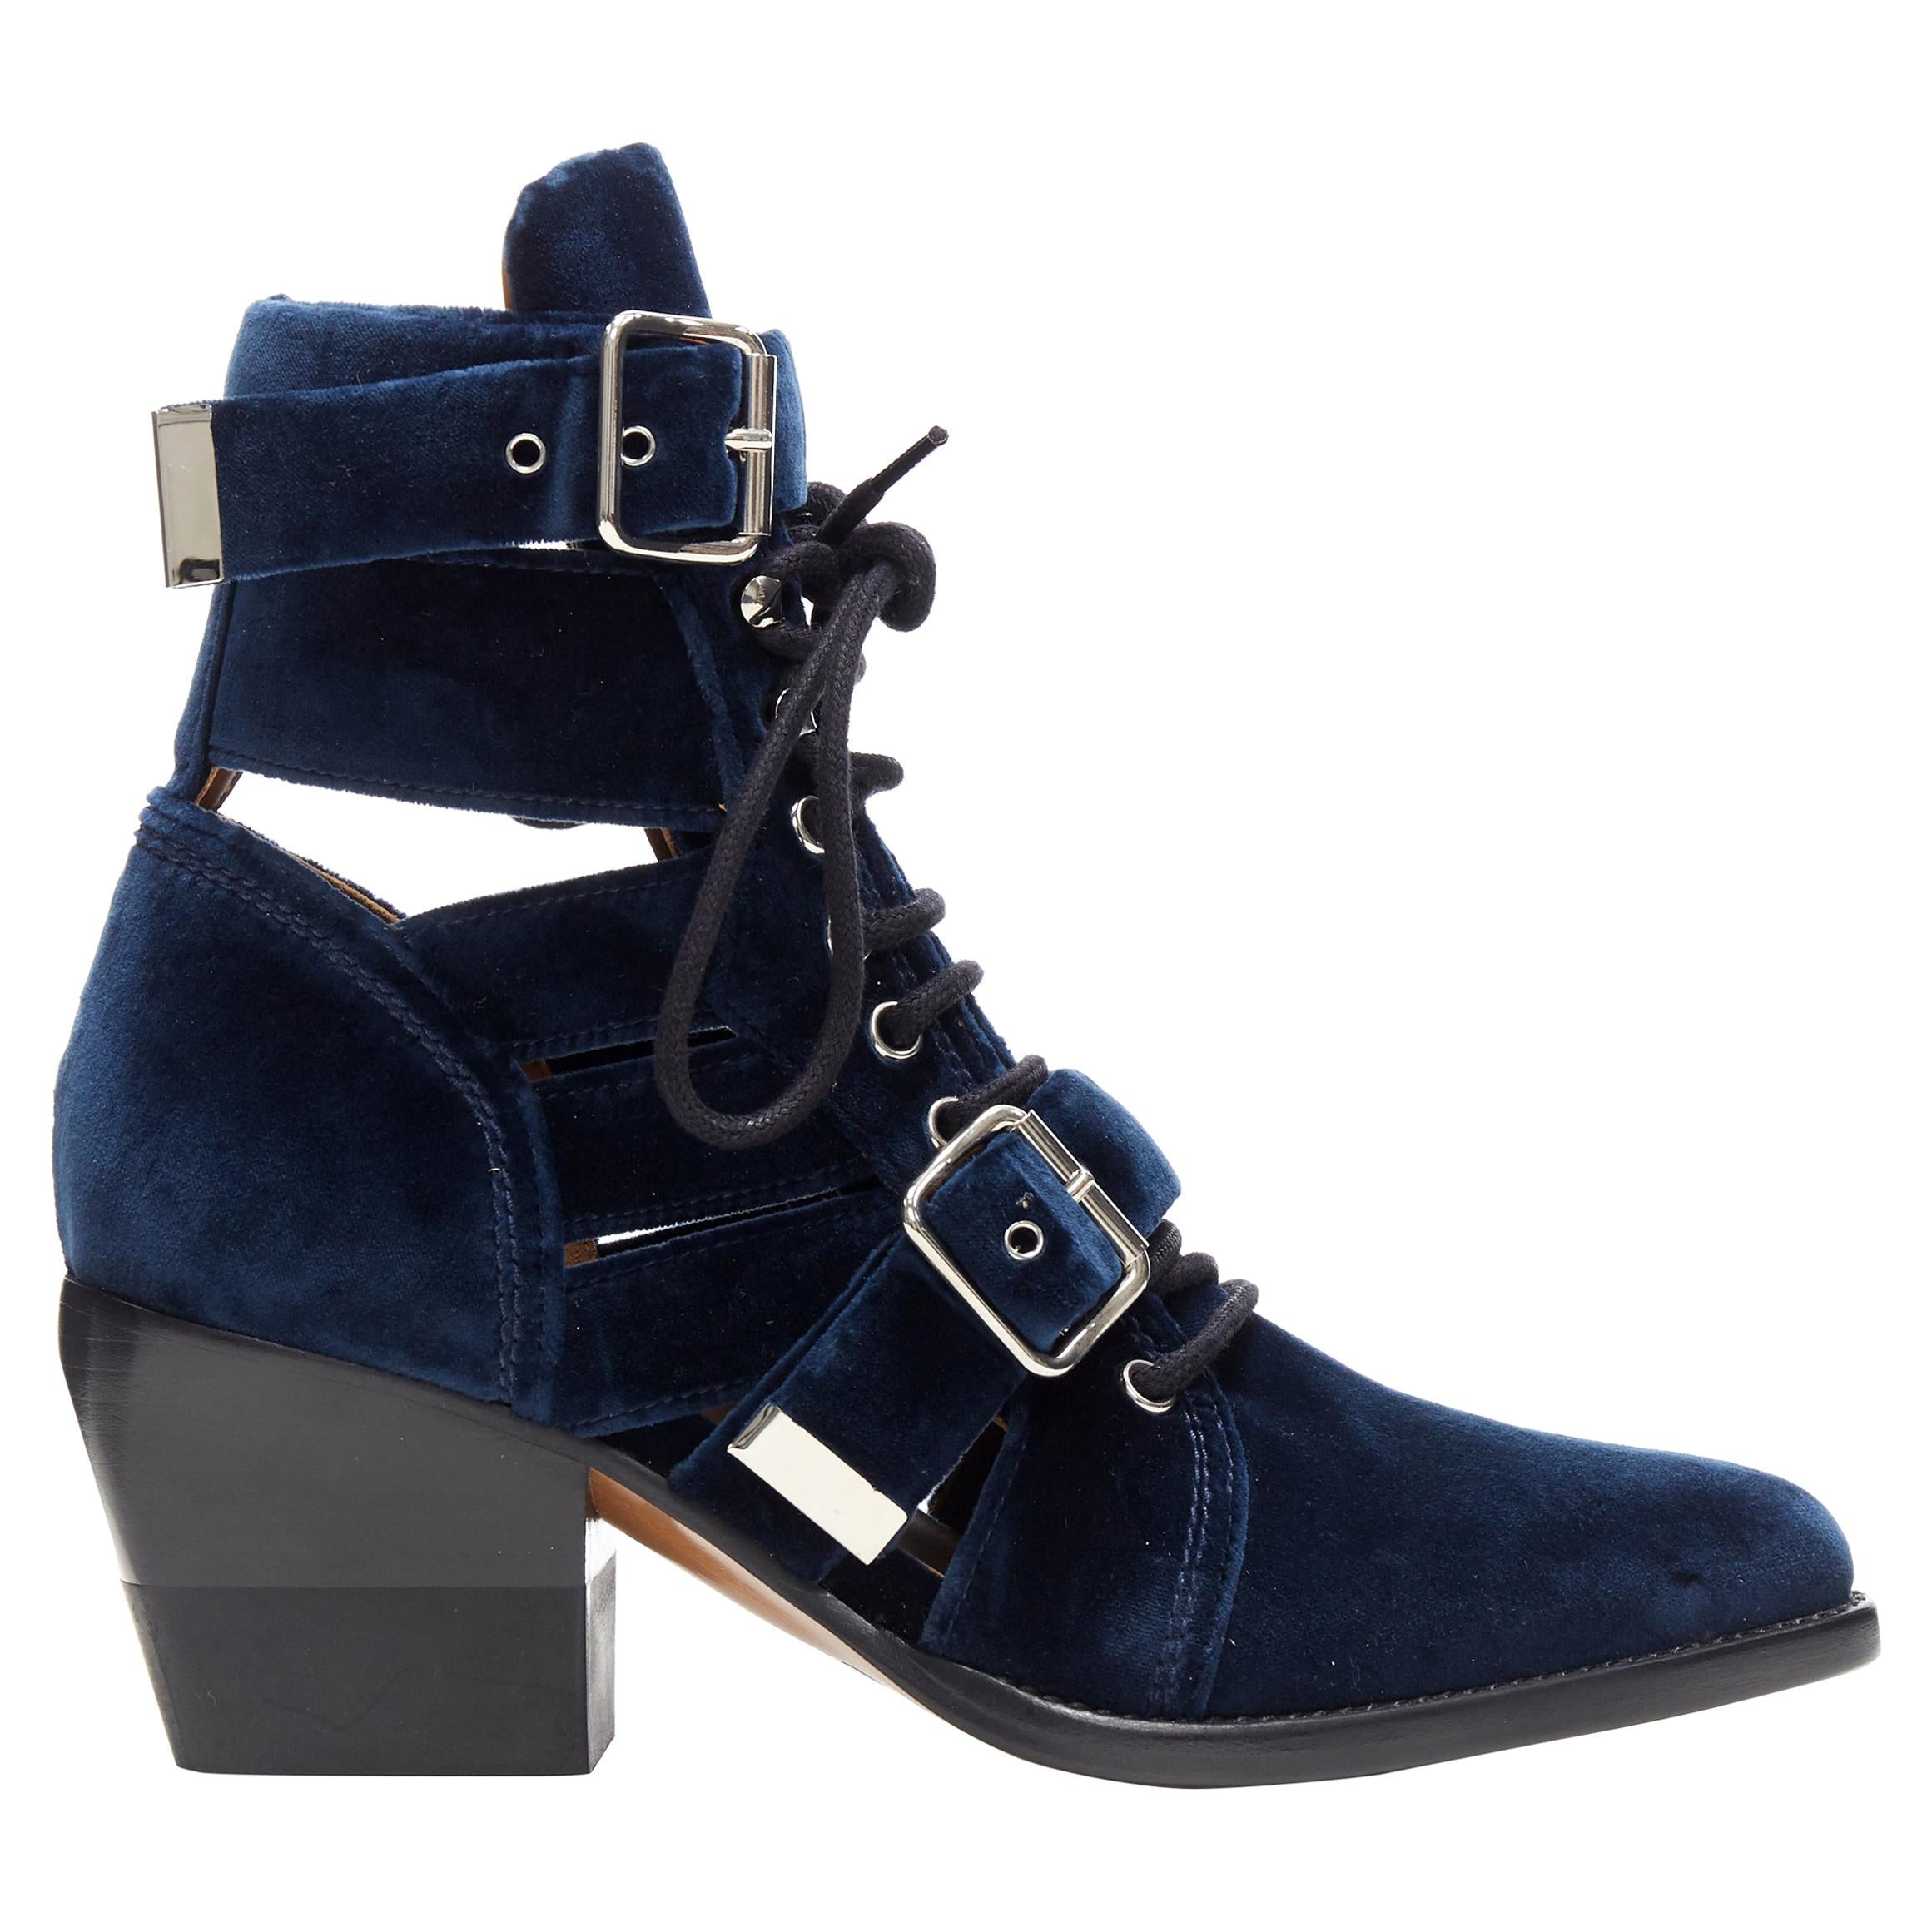 New Chloe Rylee Blue Velvet Buckle Strap Lace Up Cut Out Ankle Boots EU37